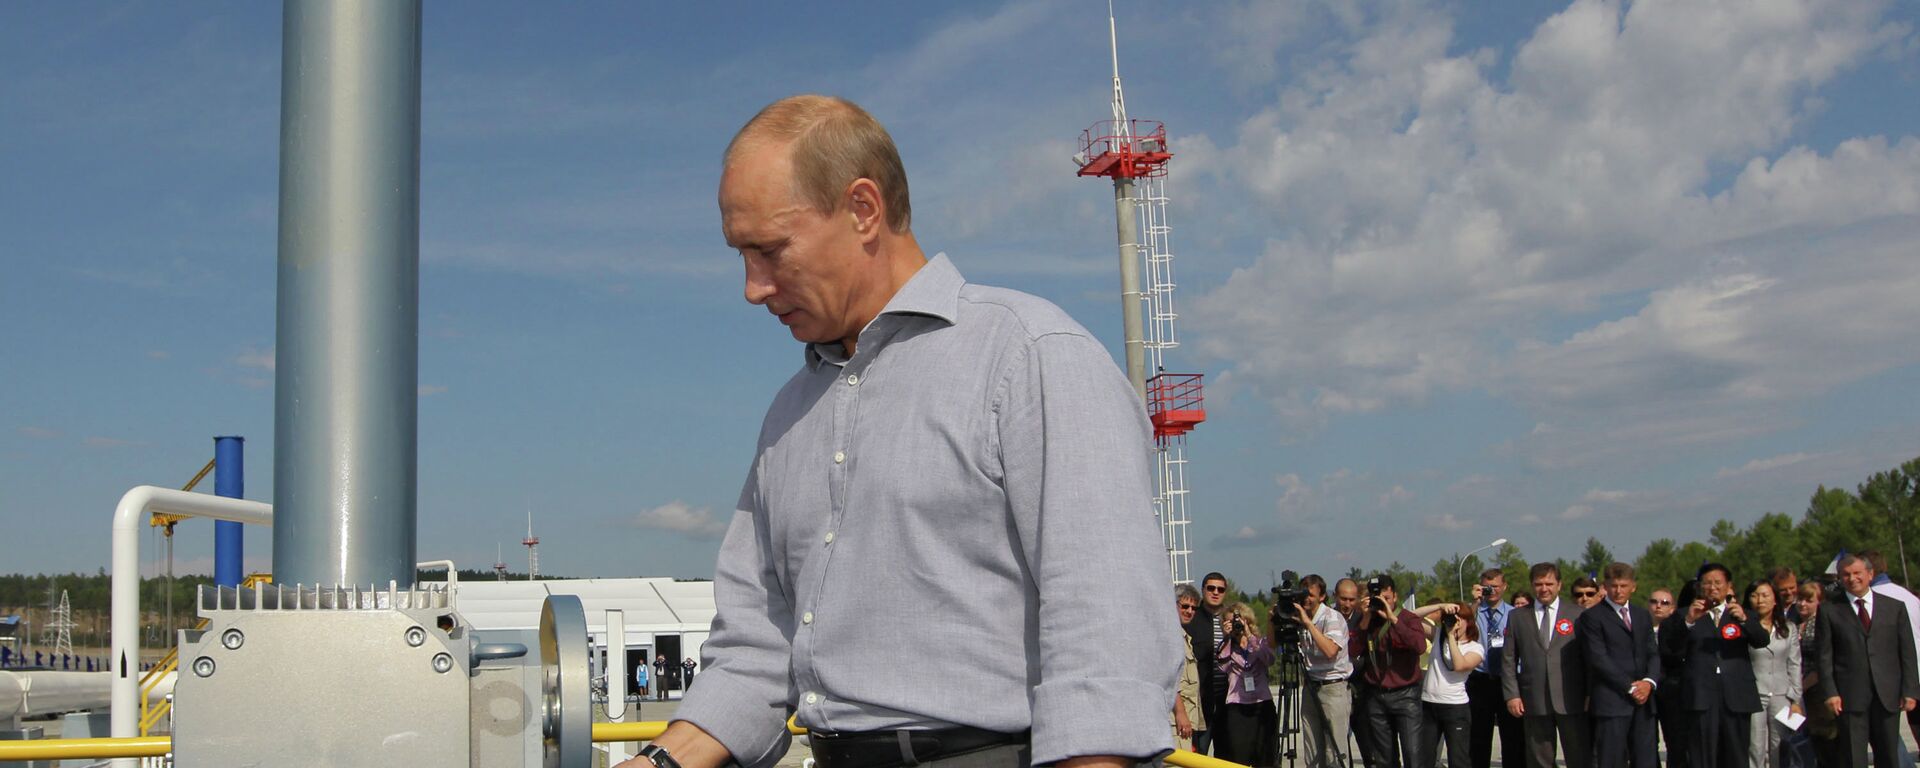 Vladimir Putin launches the Russian section of the Russian-China oil pipeline. File photo. - Sputnik International, 1920, 06.07.2022